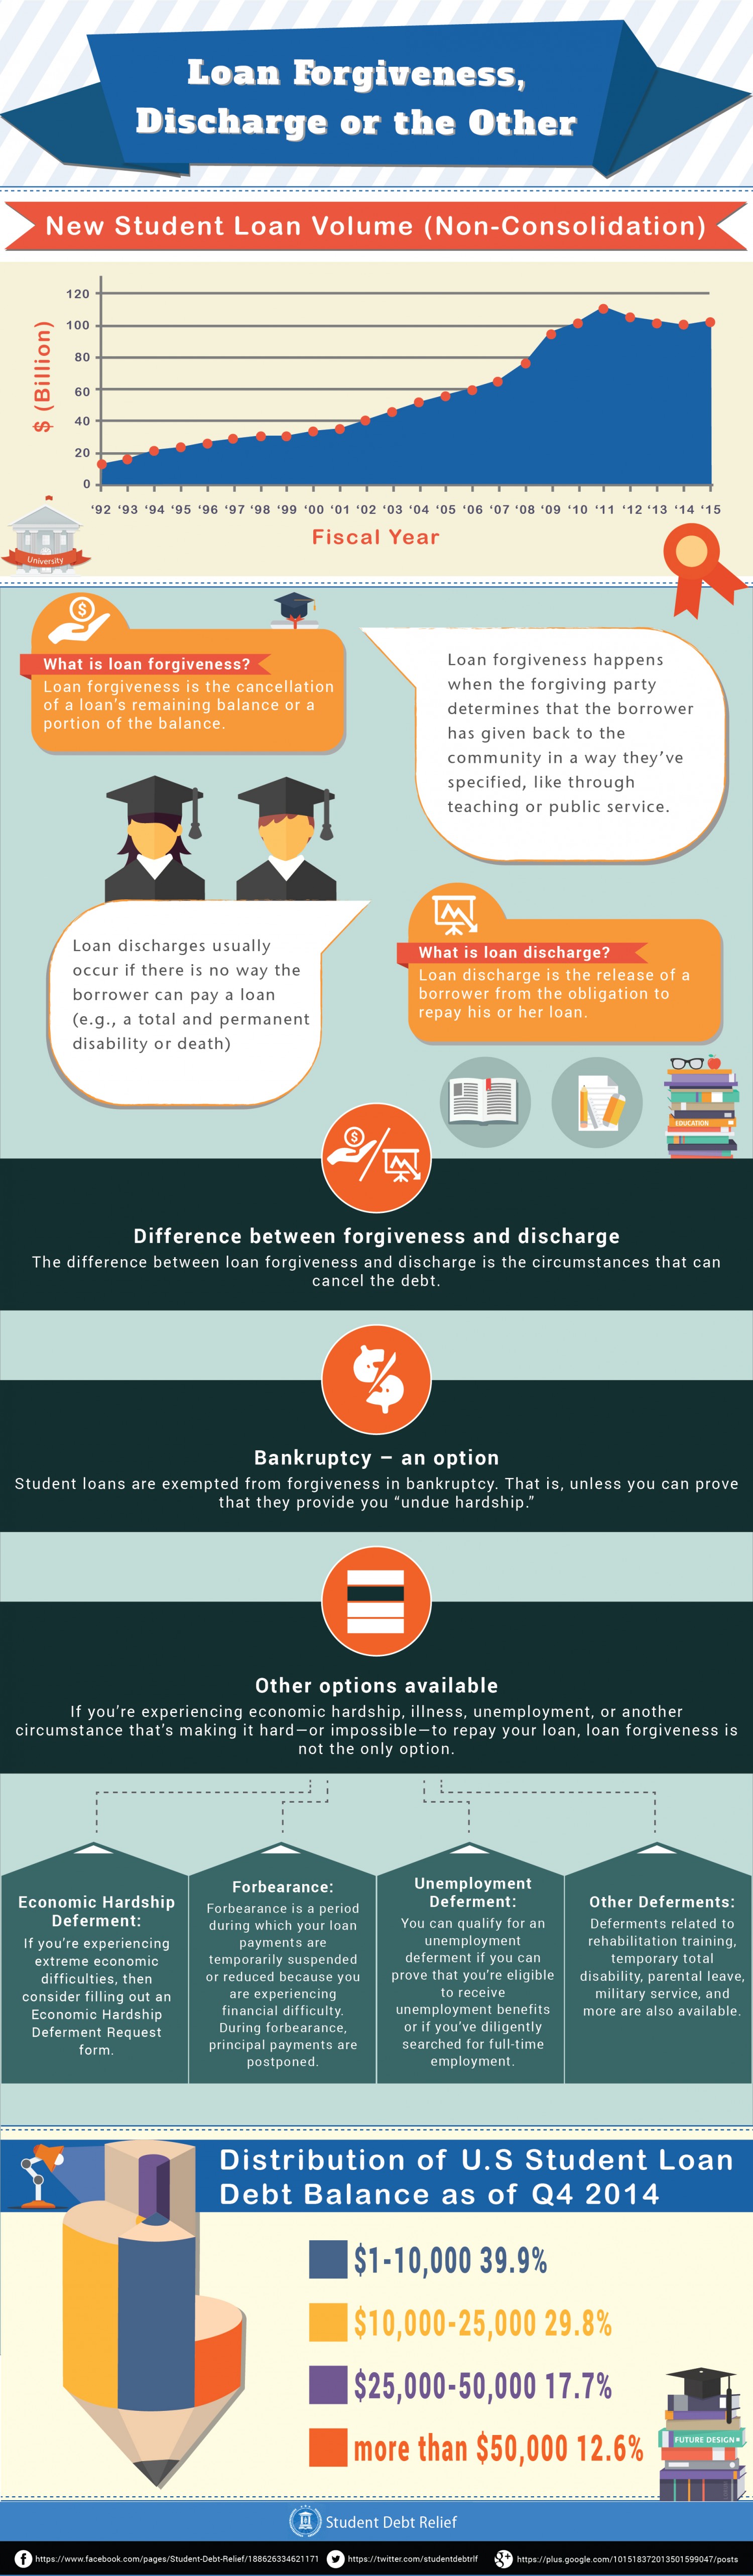 Student Loan Forgiveness: Discharge or the Other [Infographic]